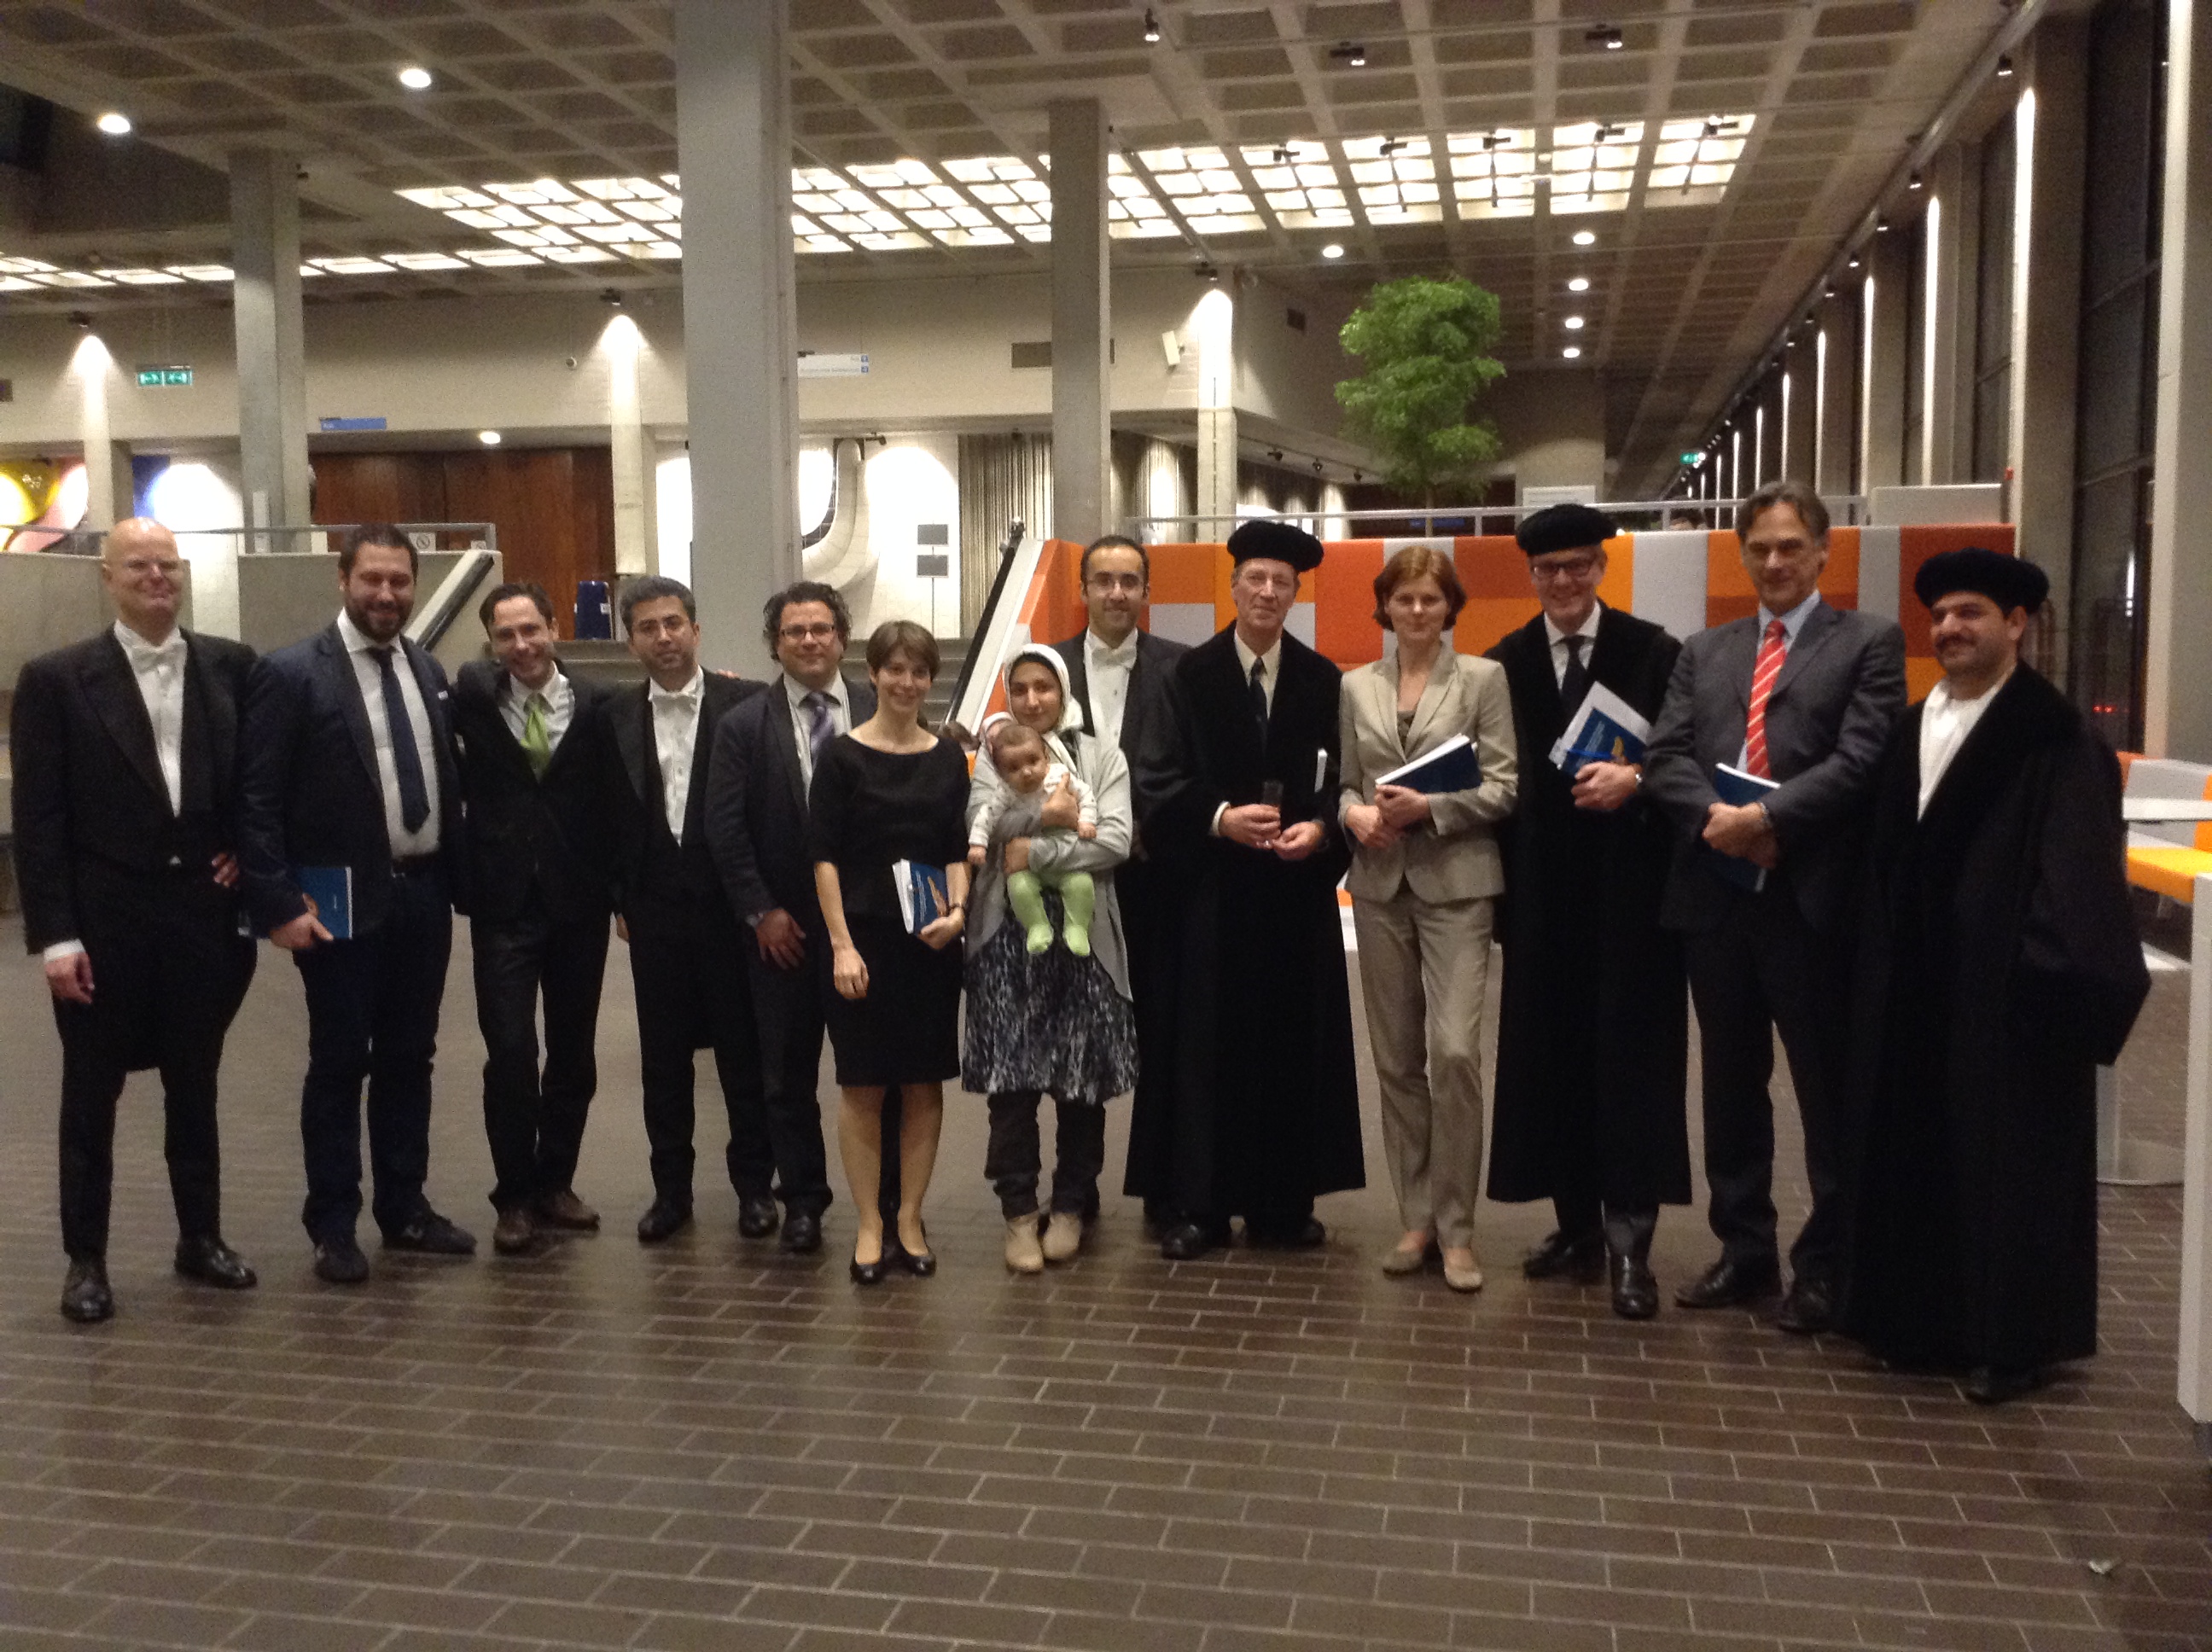 PhD Thesis of Amir Avan (promotors: Dr. Giovannetti, Dr. Wurdinger, and Prof. Peters; in the commission: Dr. Funel)